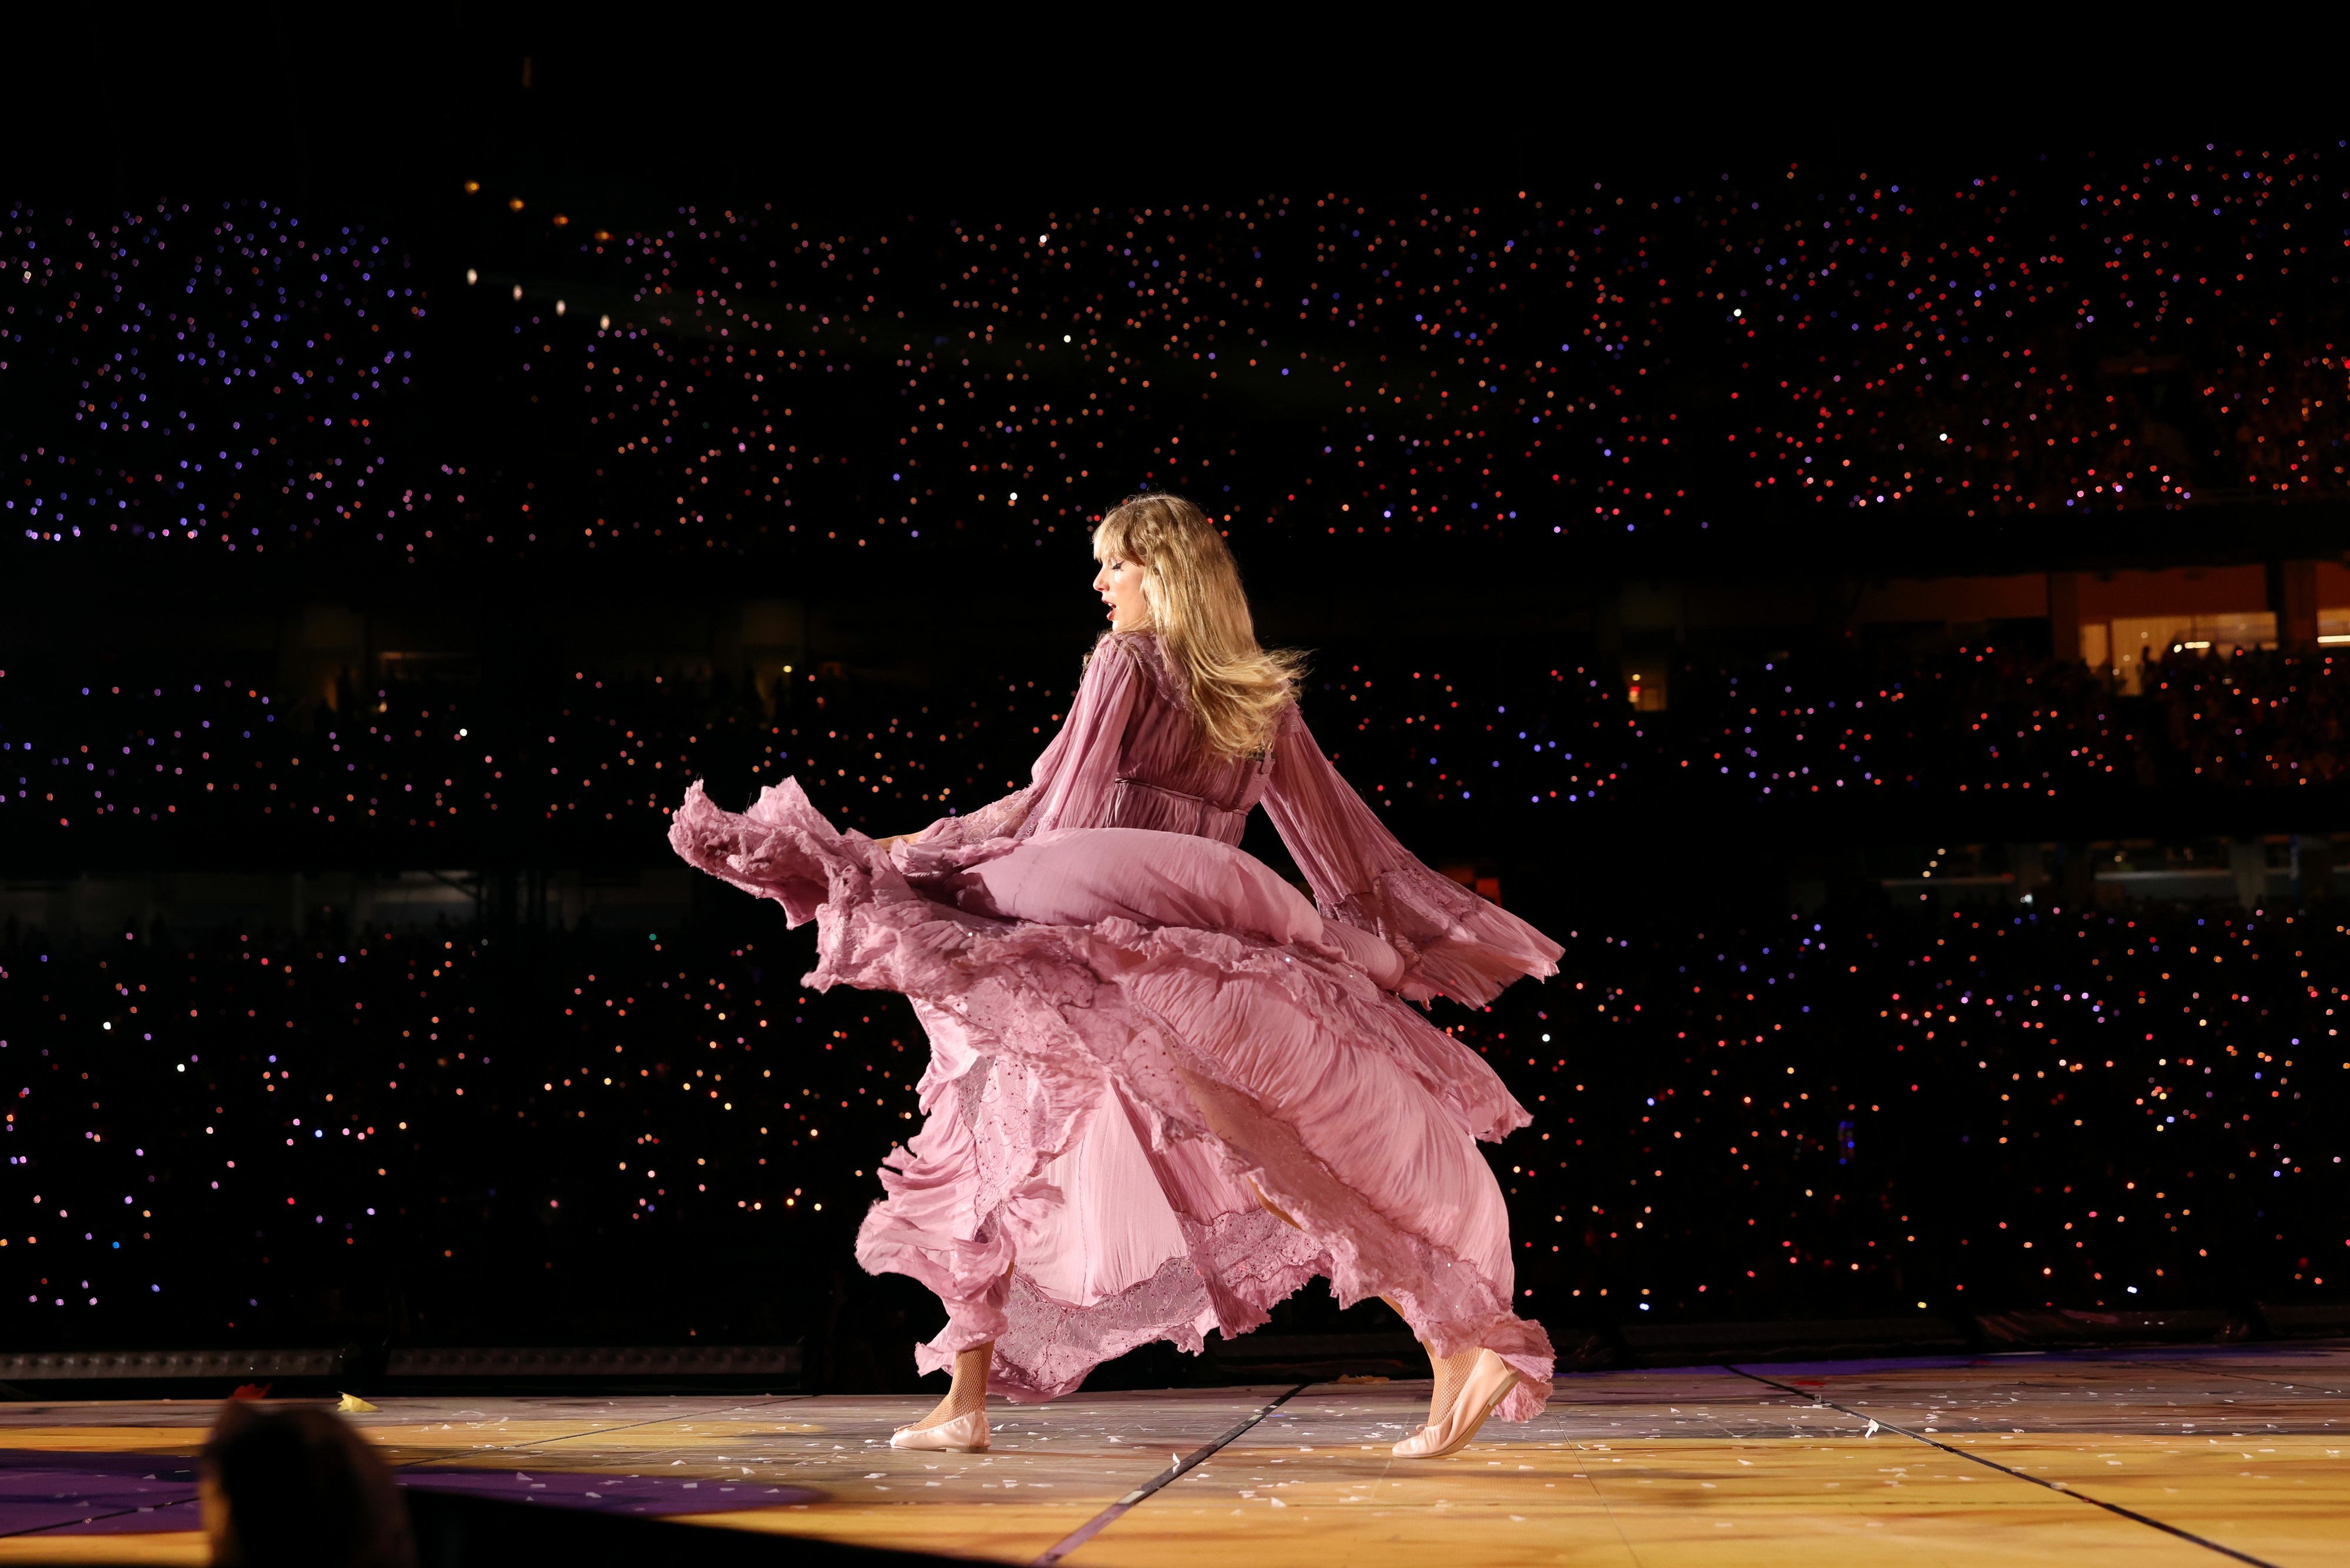 Taylor onstage in a large stadium